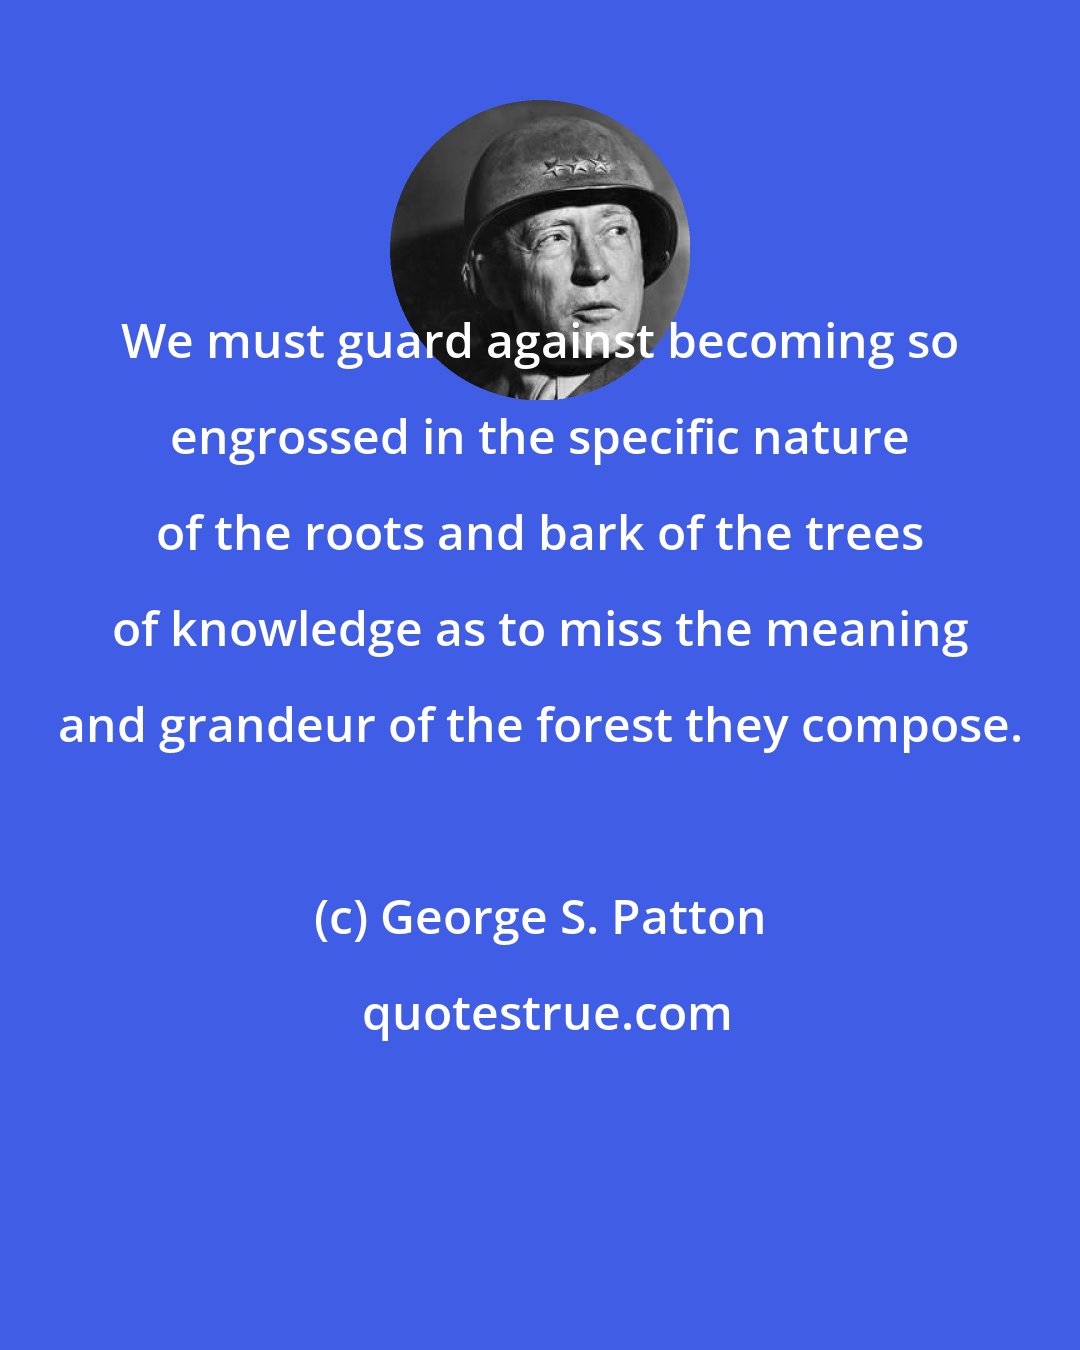 George S. Patton: We must guard against becoming so engrossed in the specific nature of the roots and bark of the trees of knowledge as to miss the meaning and grandeur of the forest they compose.